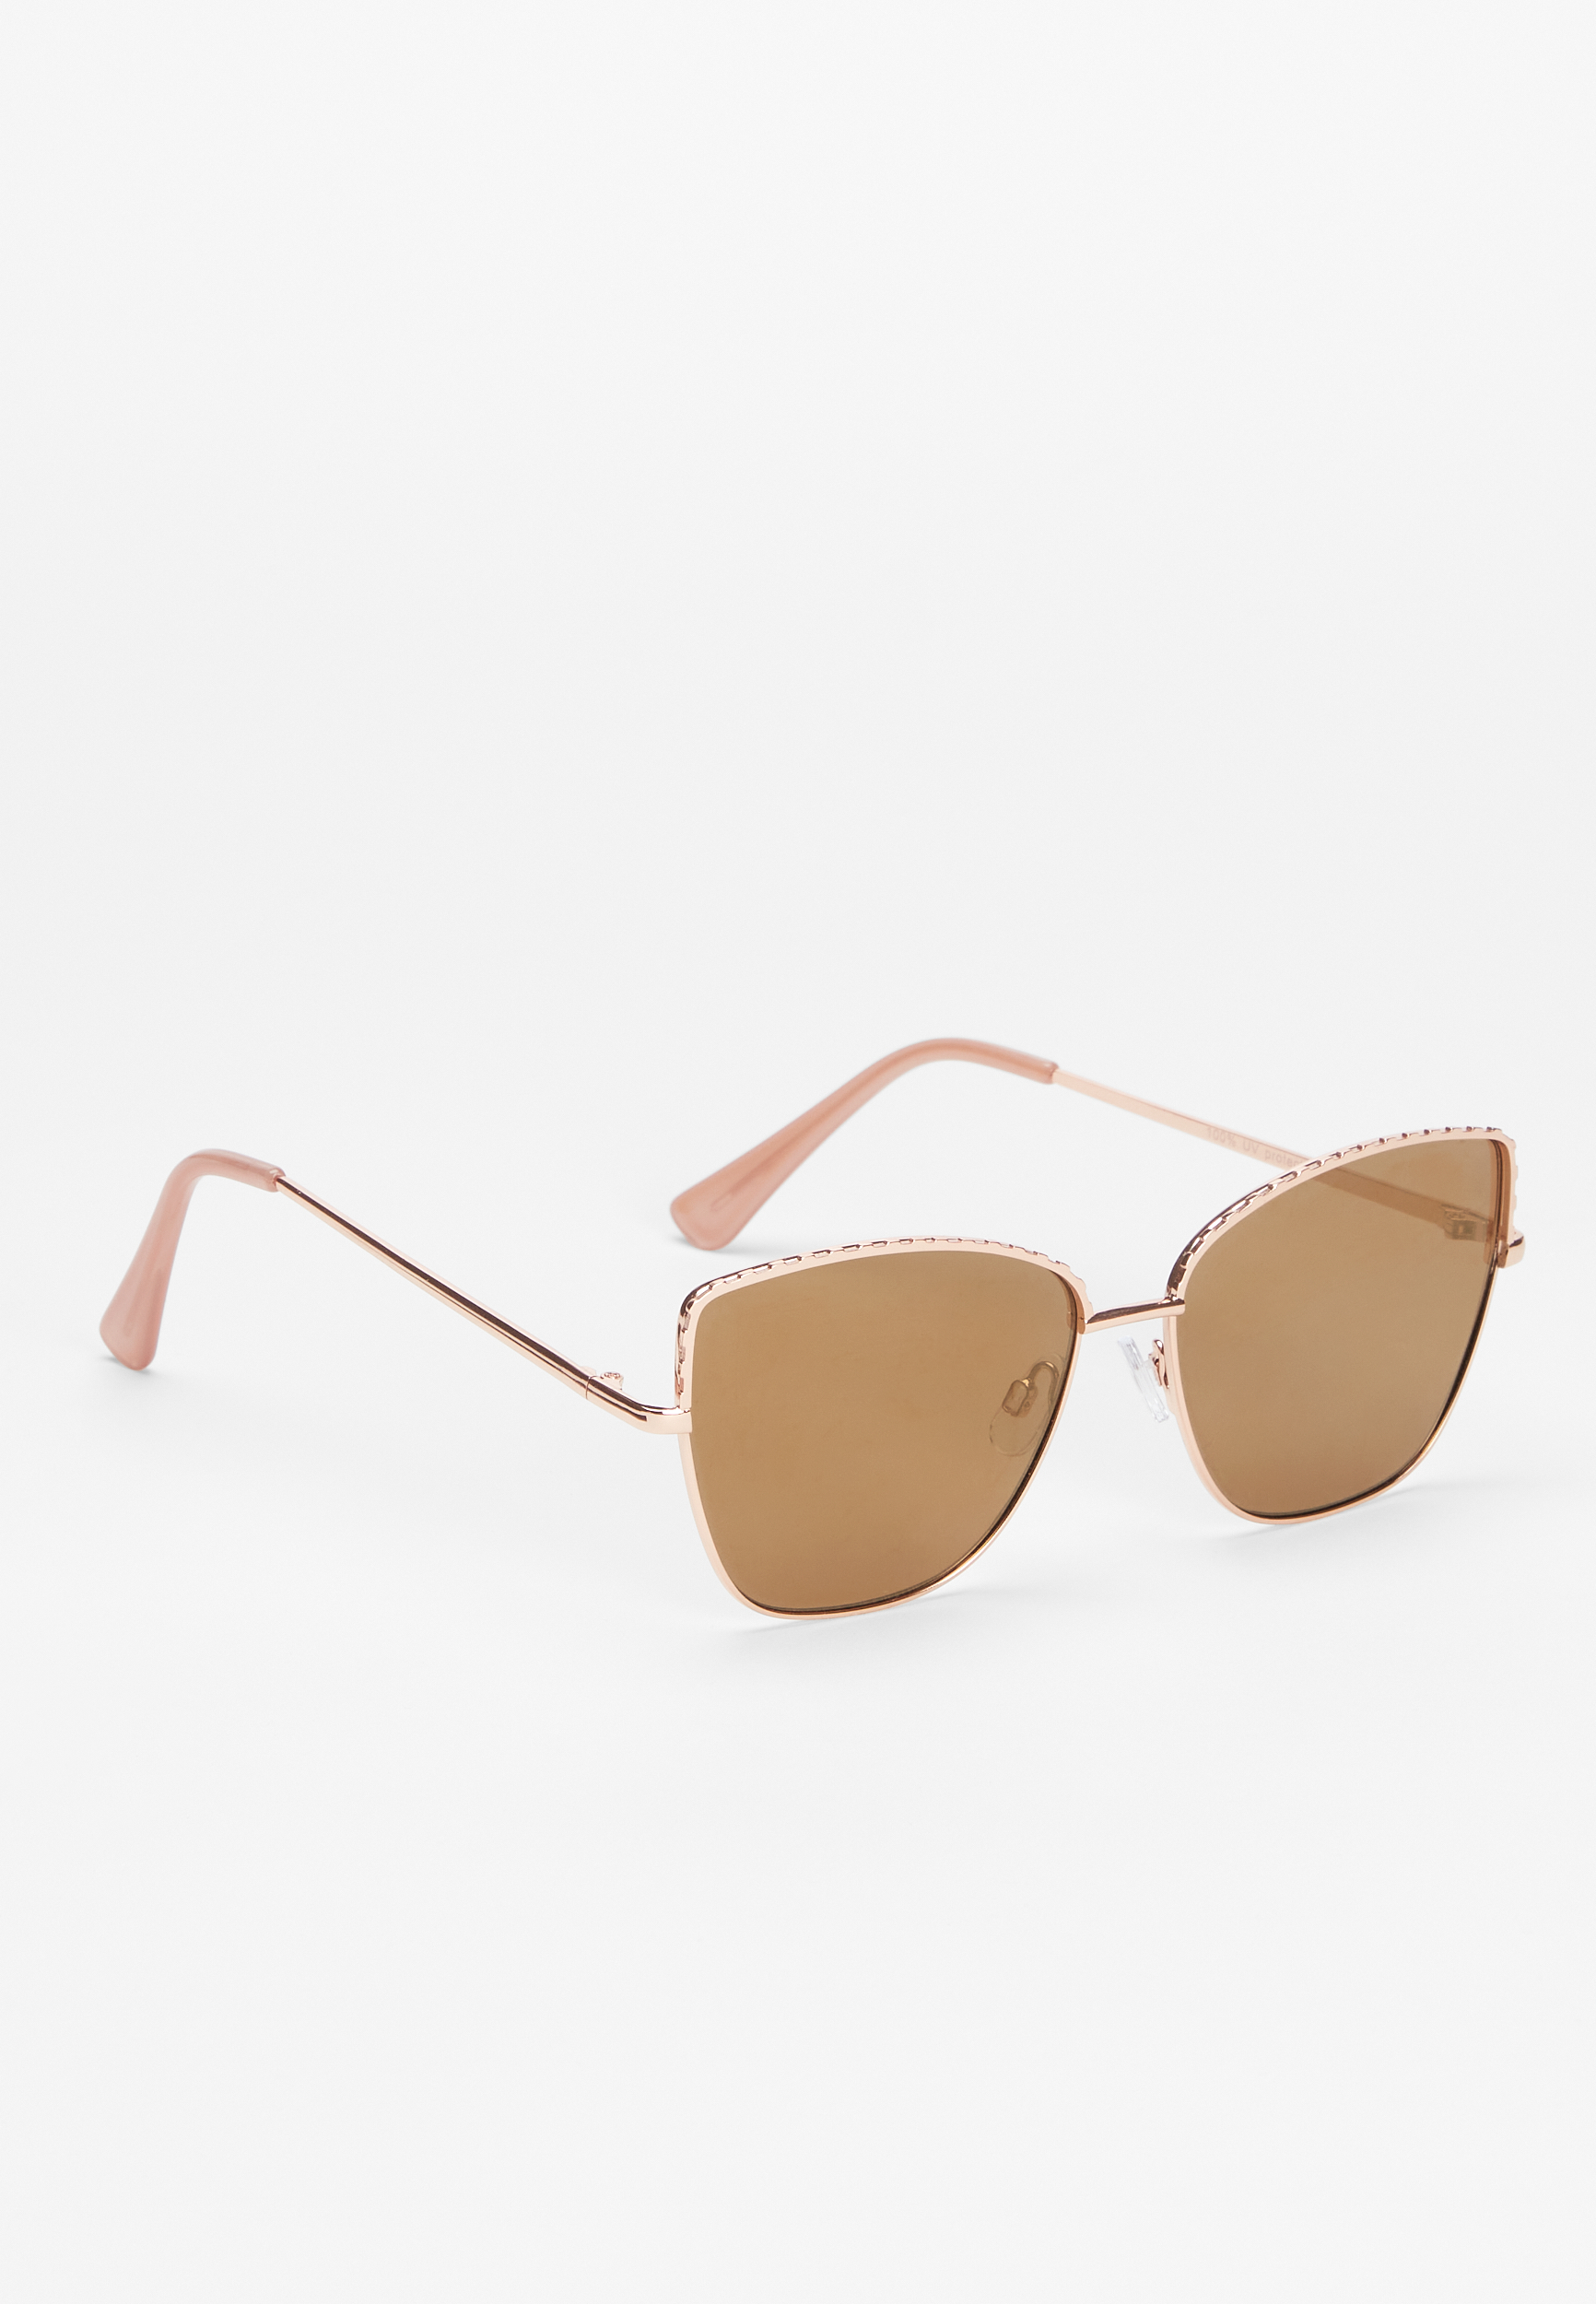 Rose Gold Cat Eye Sunglasses | maurices